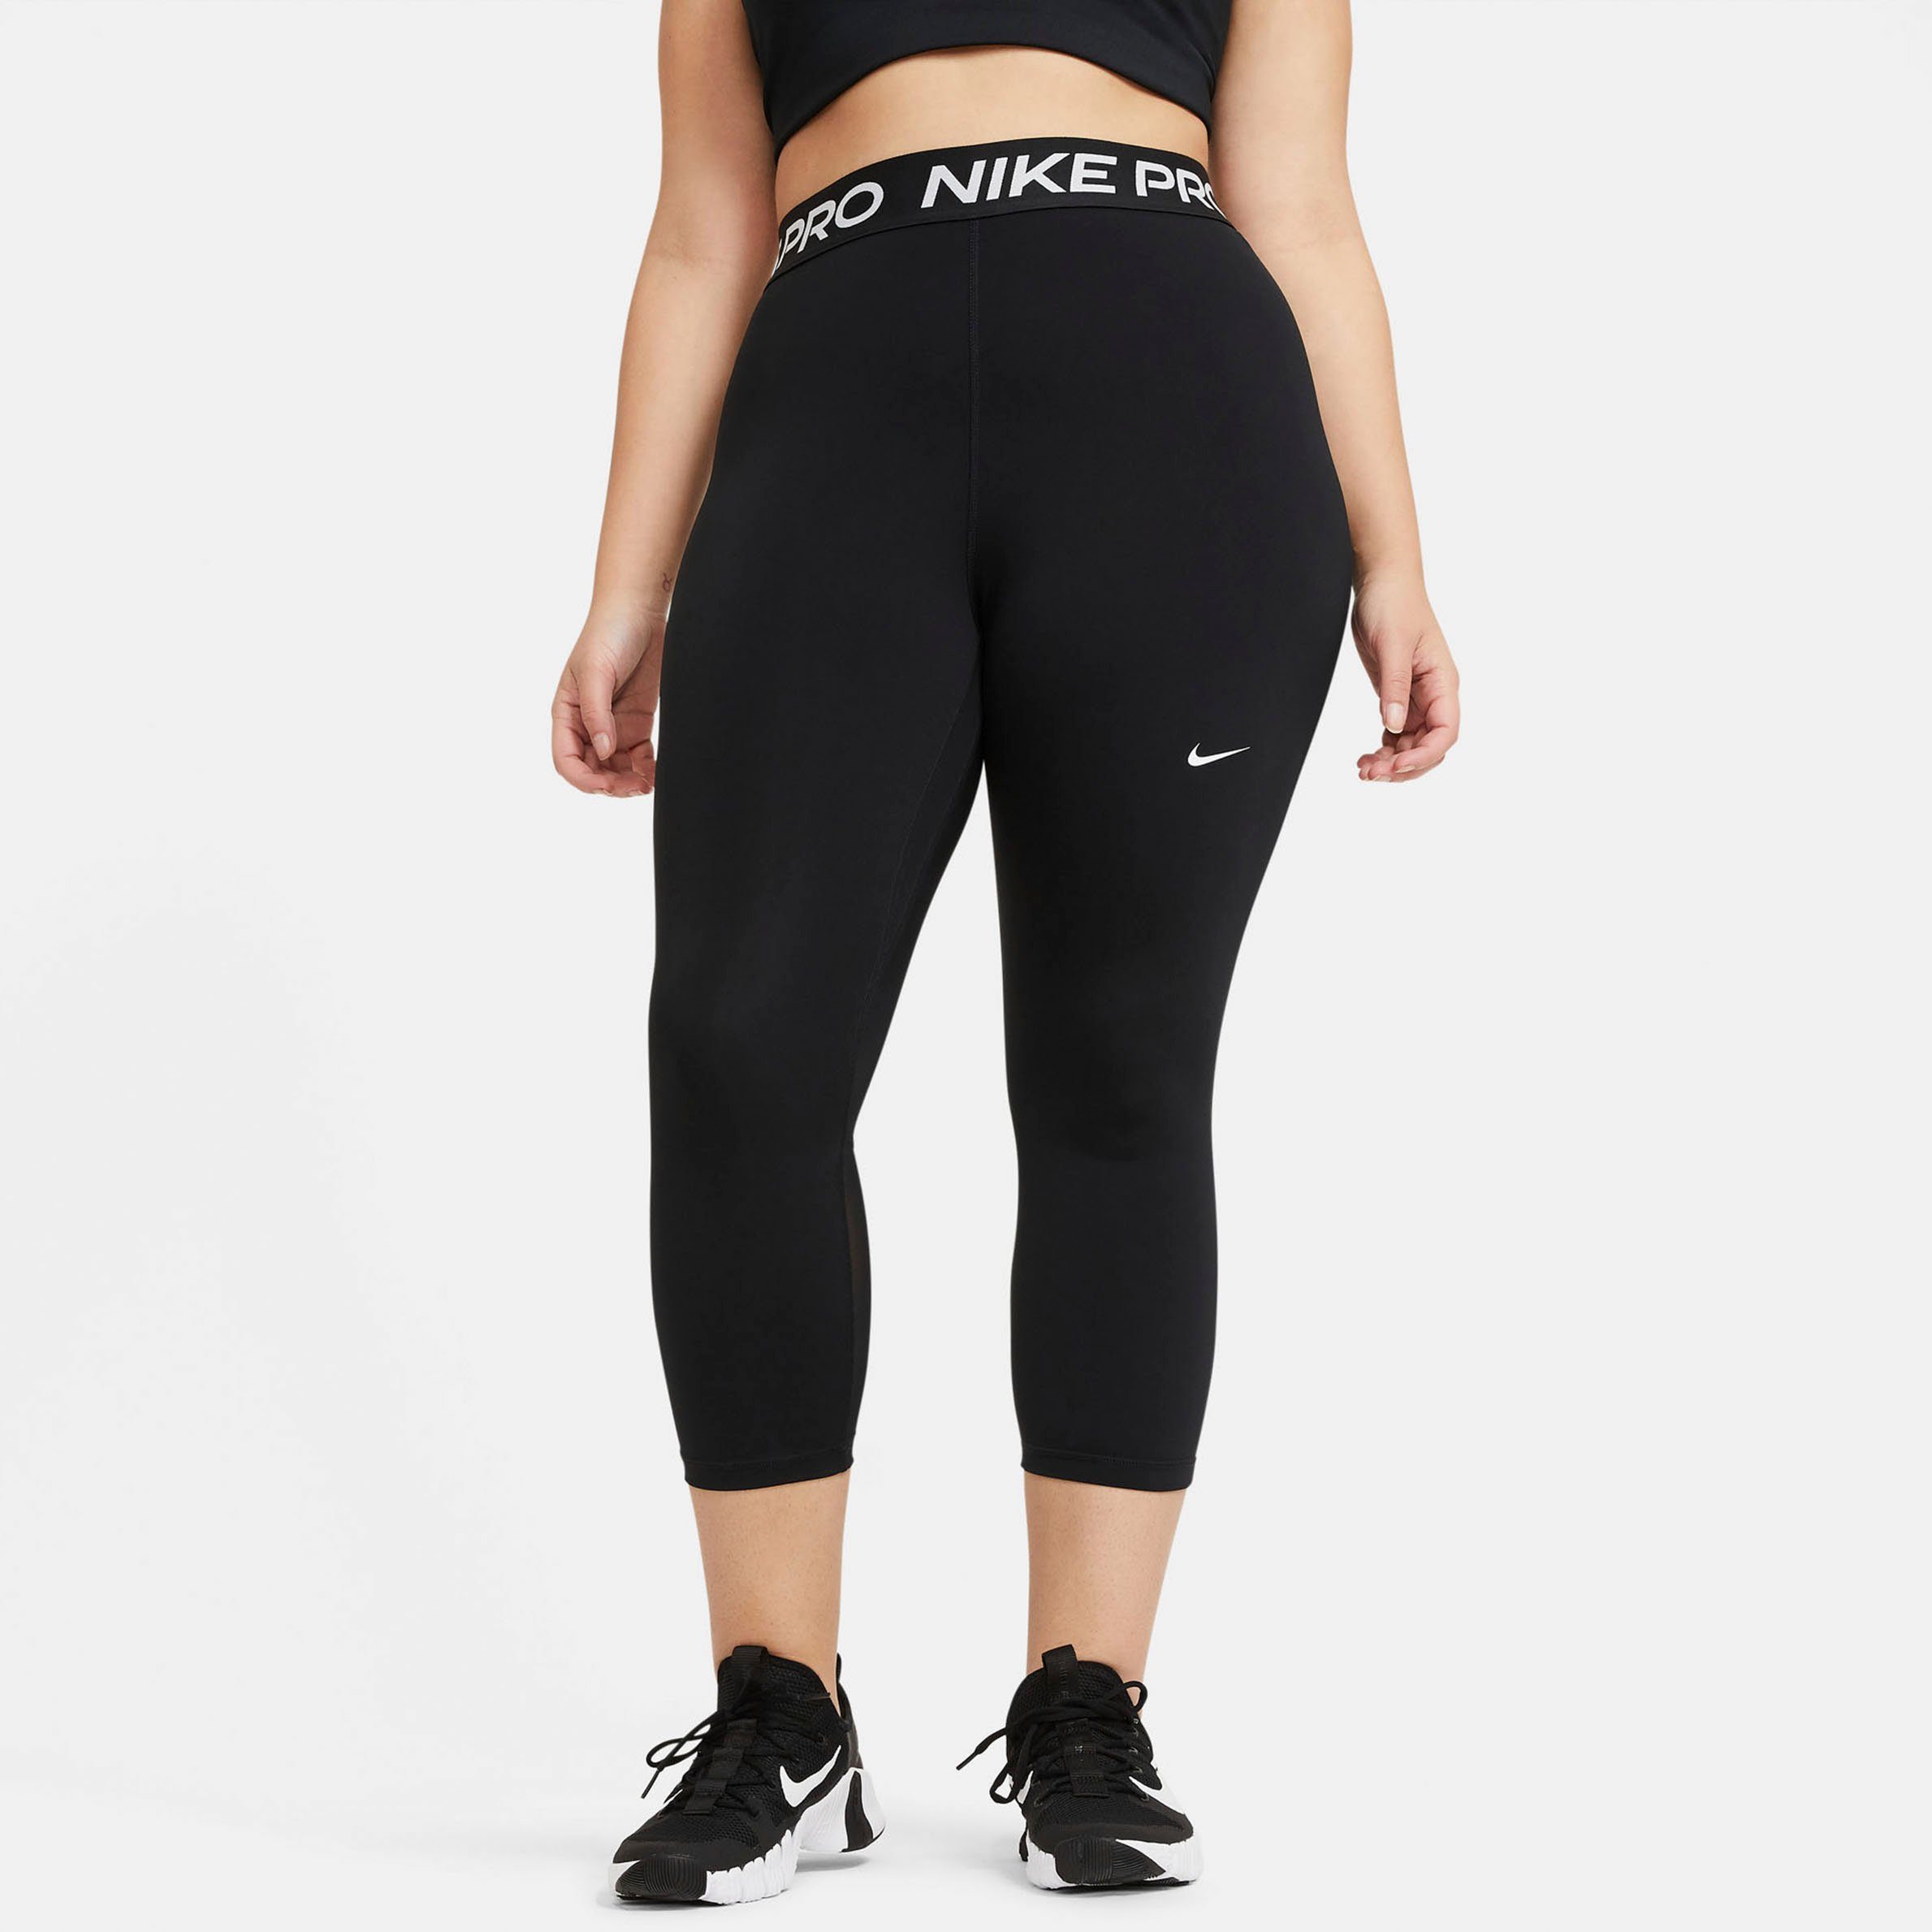 365 Funktionstights Pro Cropped Size Nike Women's Nike Plus Tights